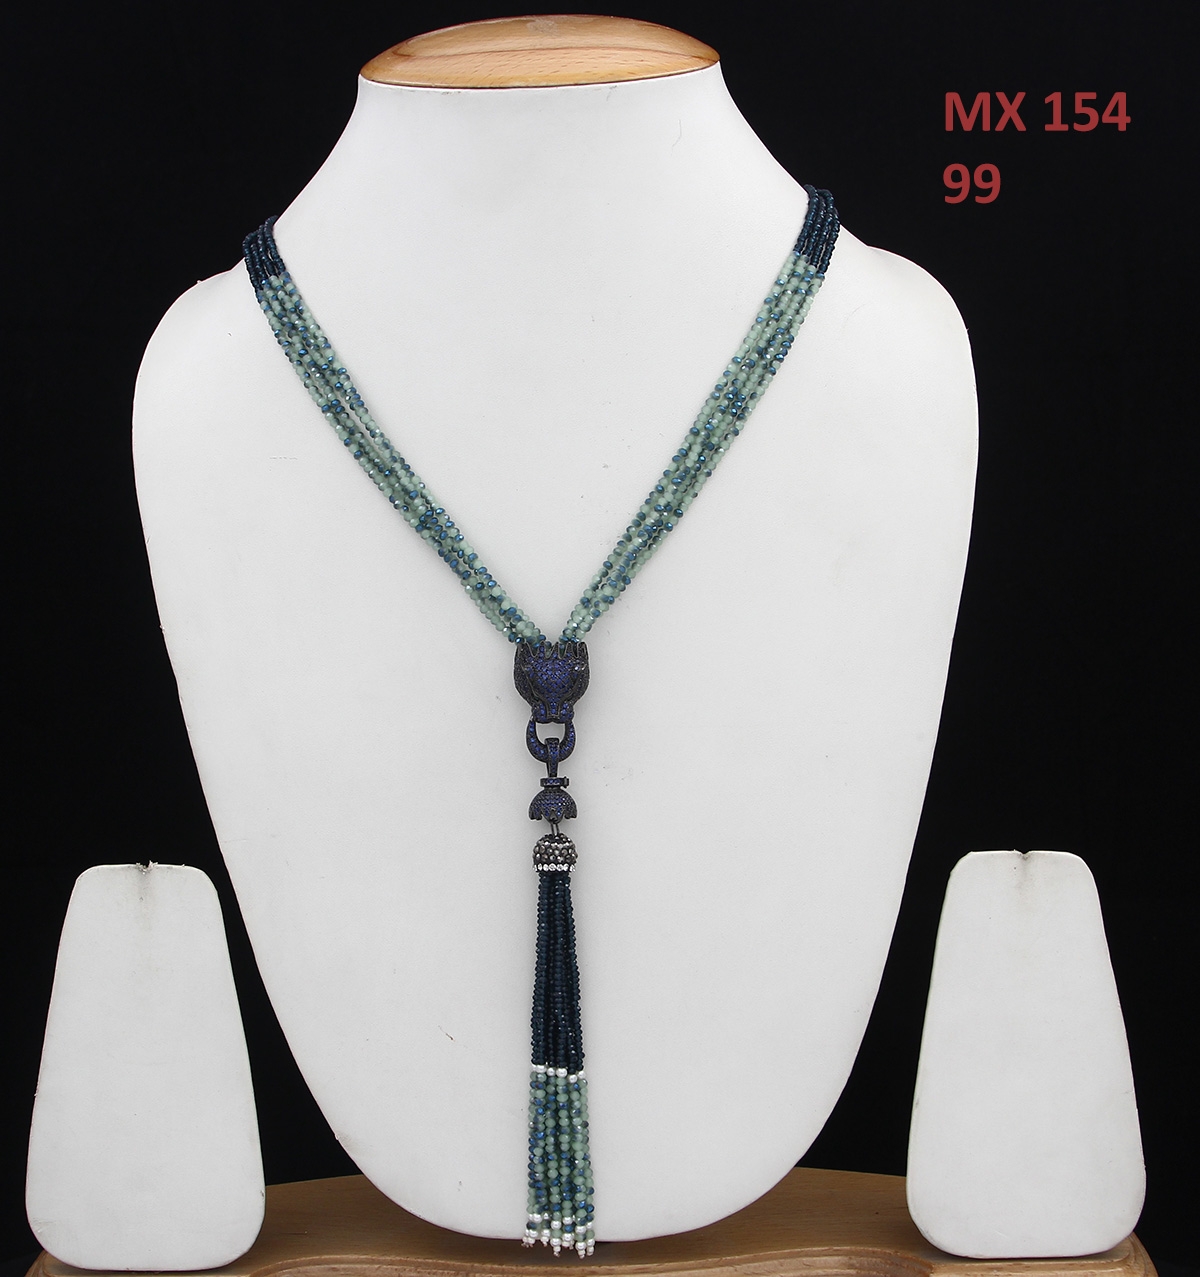 55Carat | Indian Traditional Multi Strand Beaded Statement Necklace Green Crystal Indian Handmade Ethnic Modern Fusion Statement Fashion Jewellery For Girls And Womens